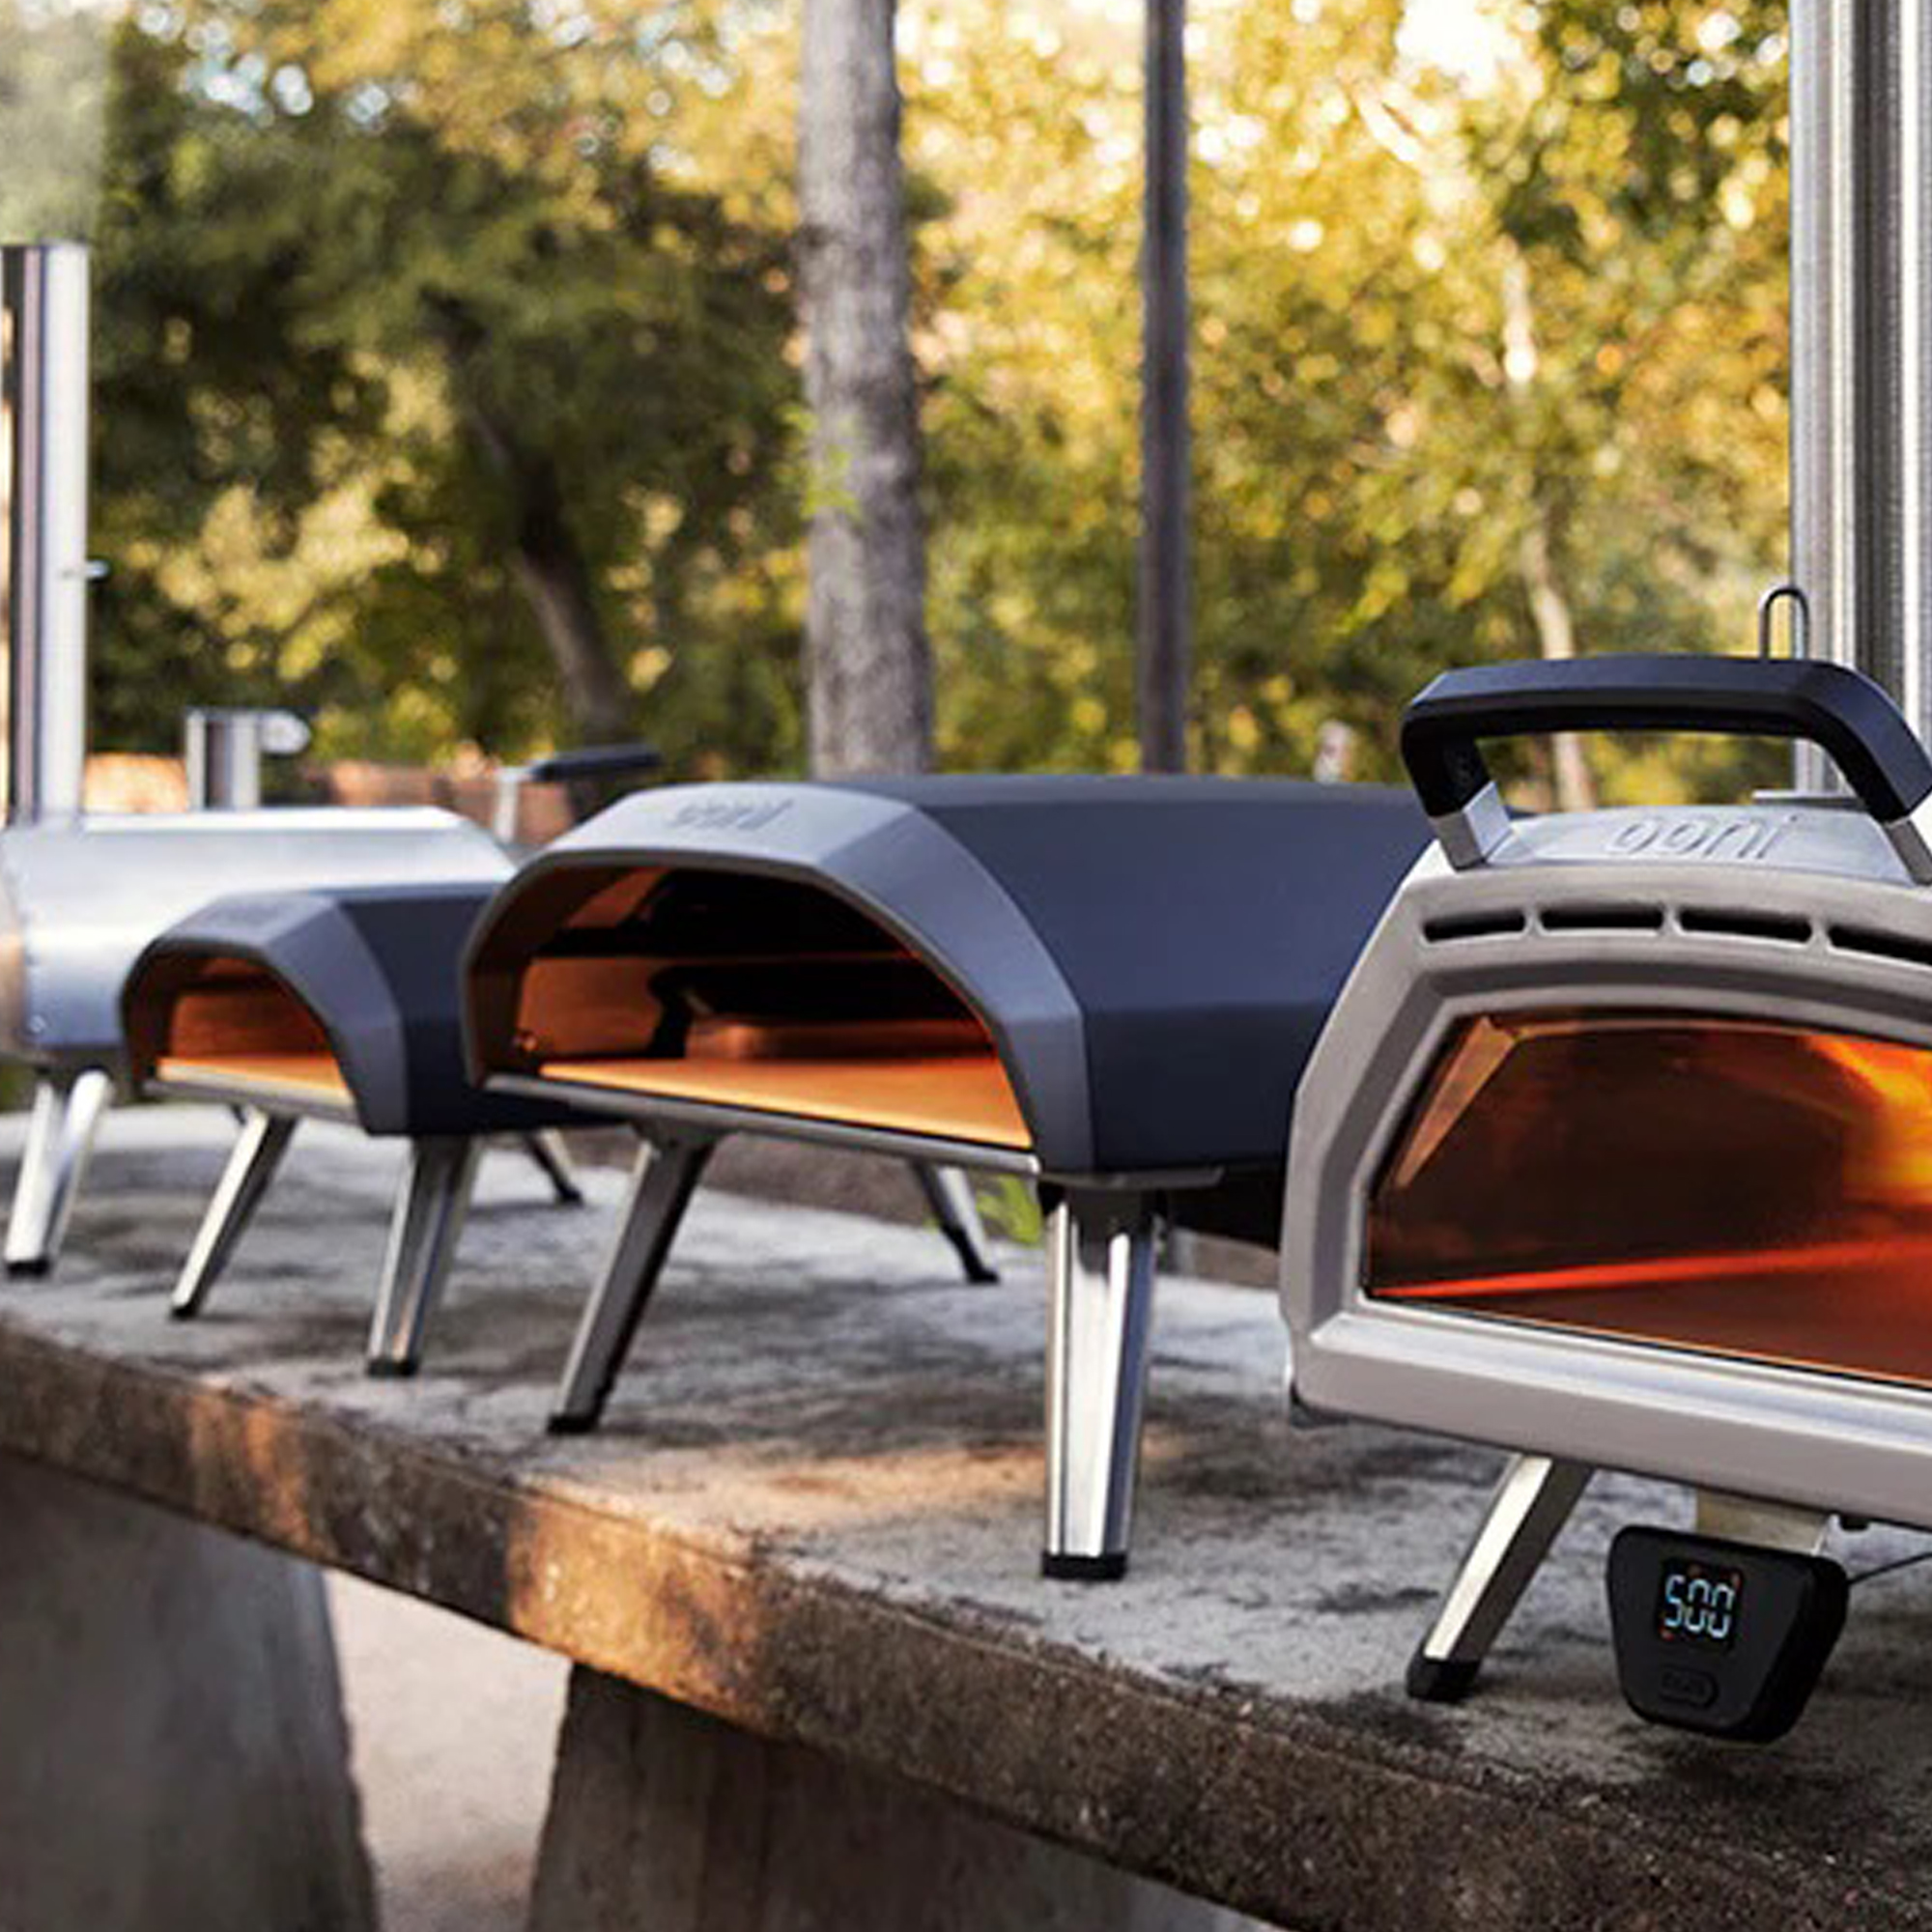 Image of Ooni pizza oven line up in promotional image